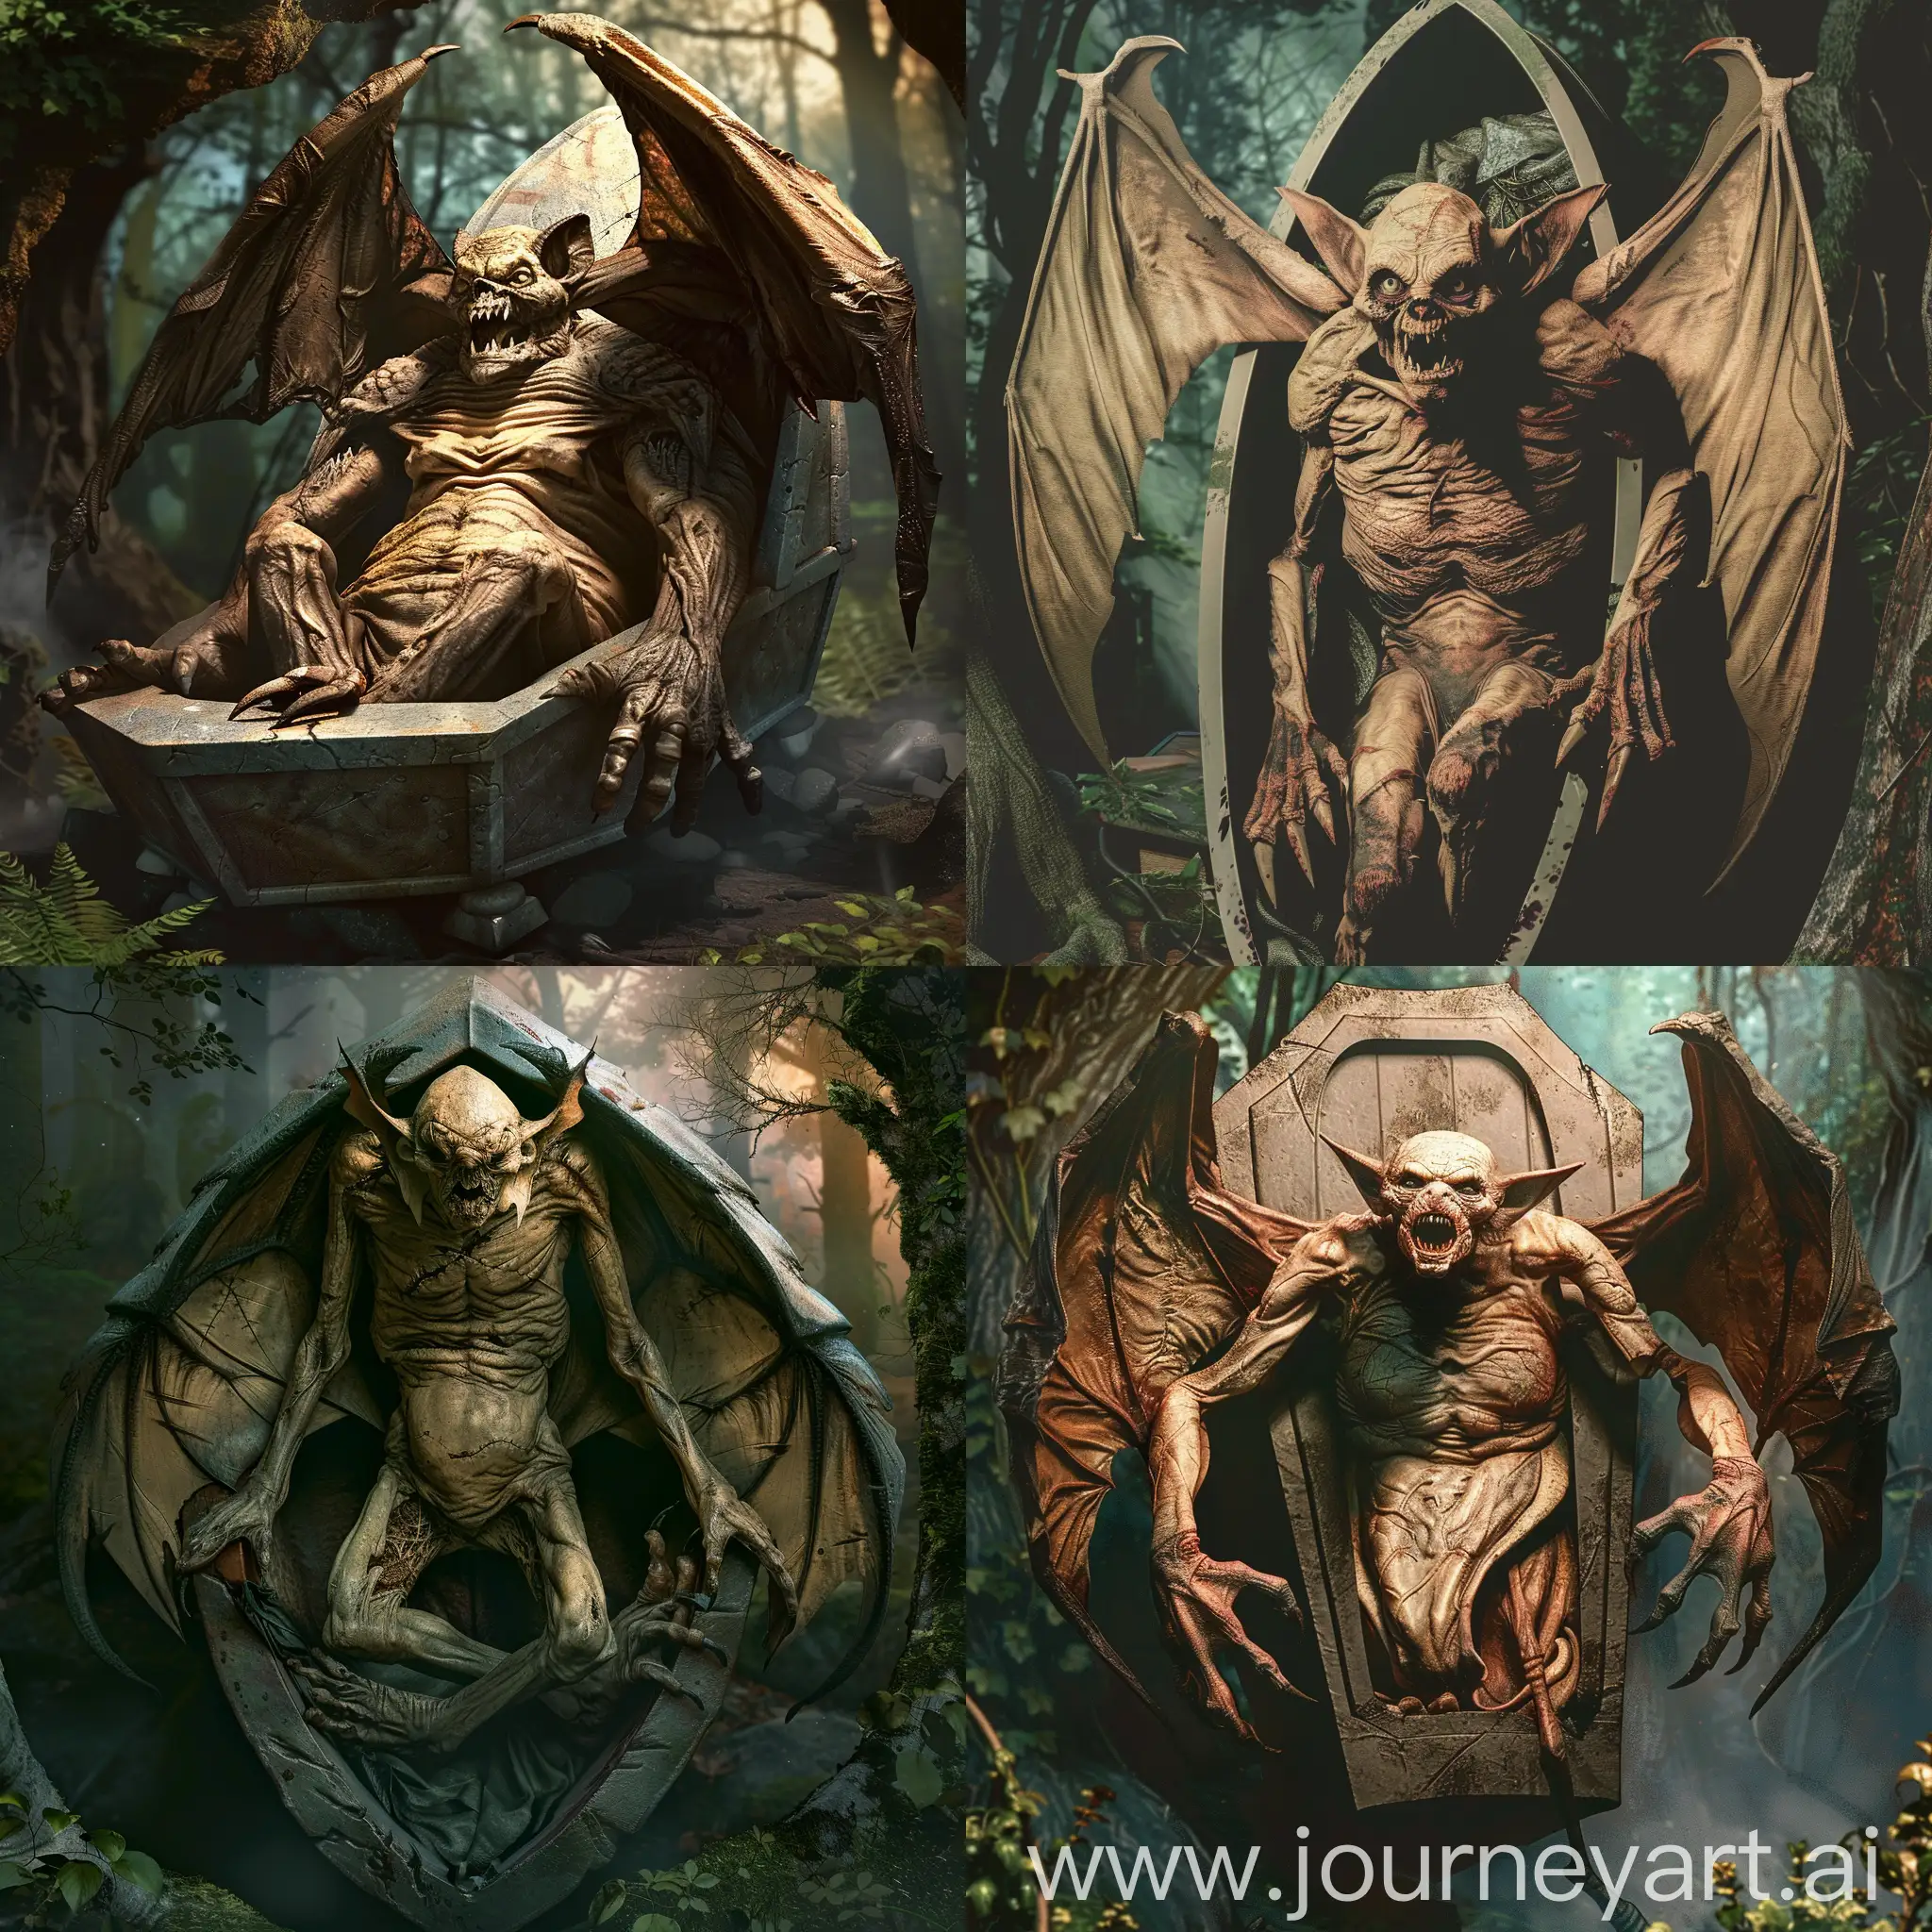 A frightening monster with bat-like wings and the features of an old person. Its body is covered in deep wrinkles, giving it a decrepit and unnerving appearance, lying in a coffin without pant, showing its fangs, with claws sharp as knives, in a dark, eerie forest setting. The shadow under the monster's body is more realistic. No cloth covering the body.